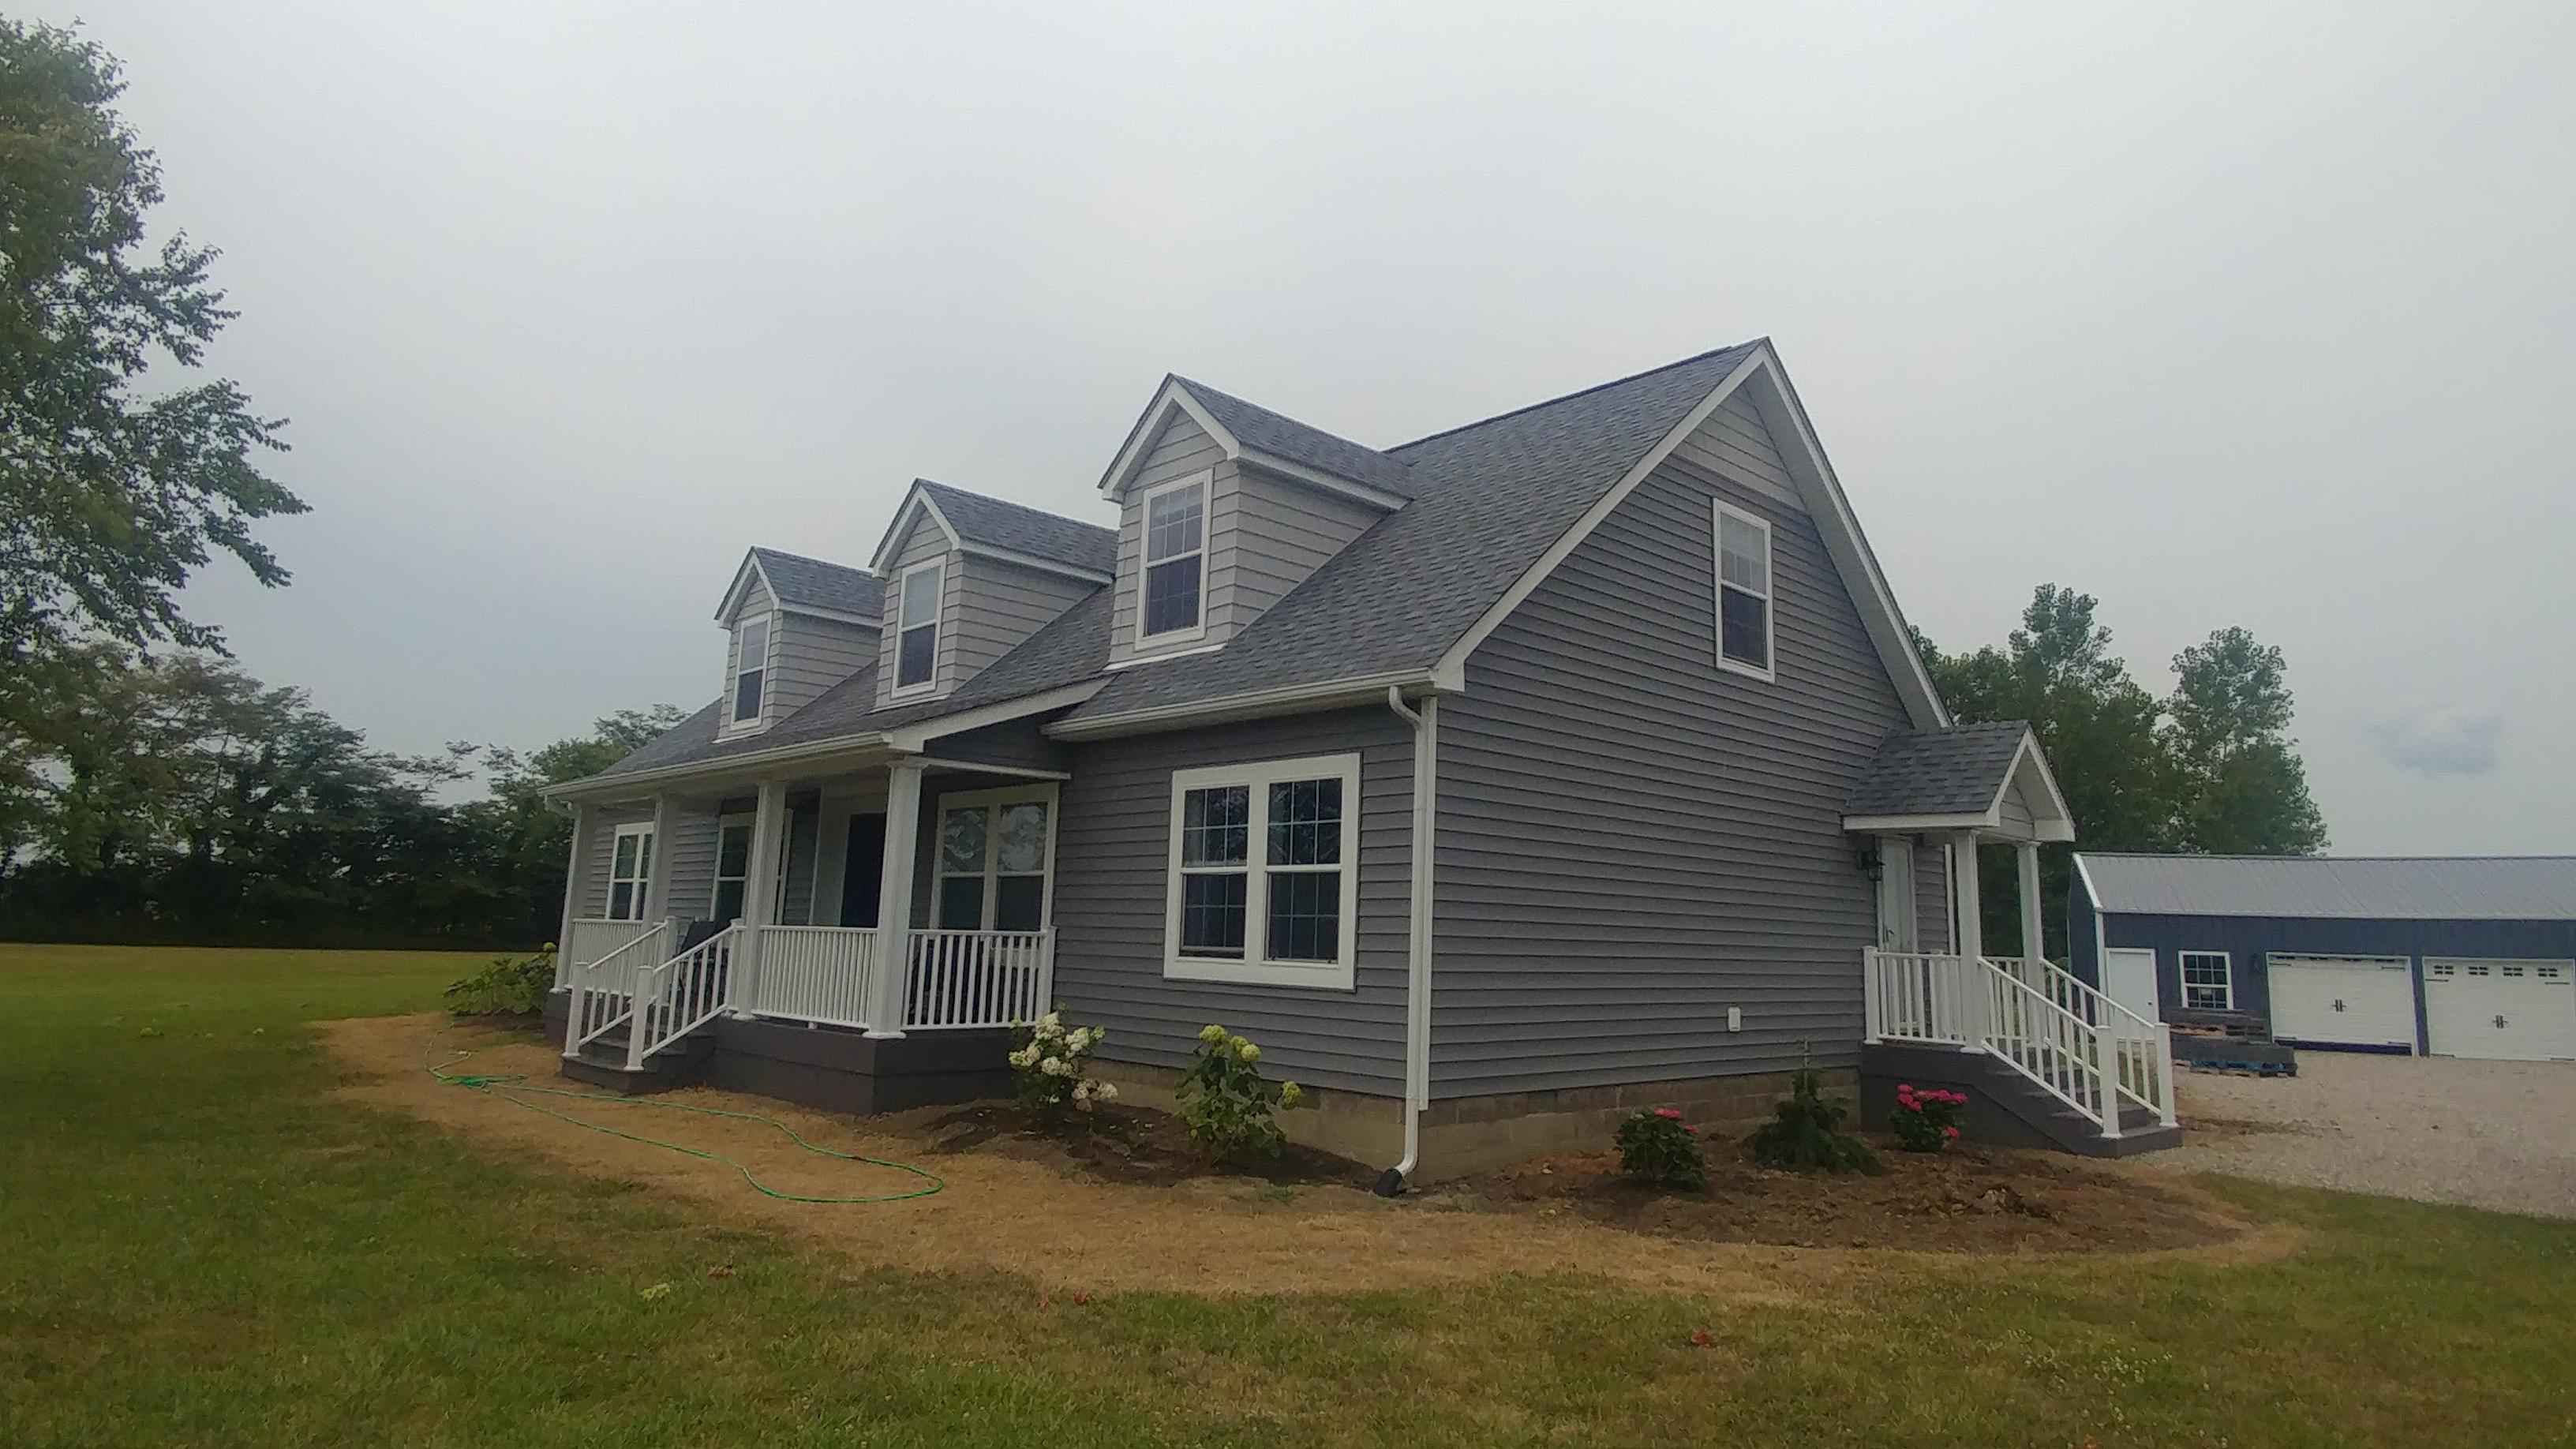 ADDED FRONT PORCH ALONG WITH THE NEW ROOF. ALSO, INSTALLED VINTYL SIDING WITH TRIMS. The Home Center, Exterior & Interior Remodeling Circleville (740)474-3250